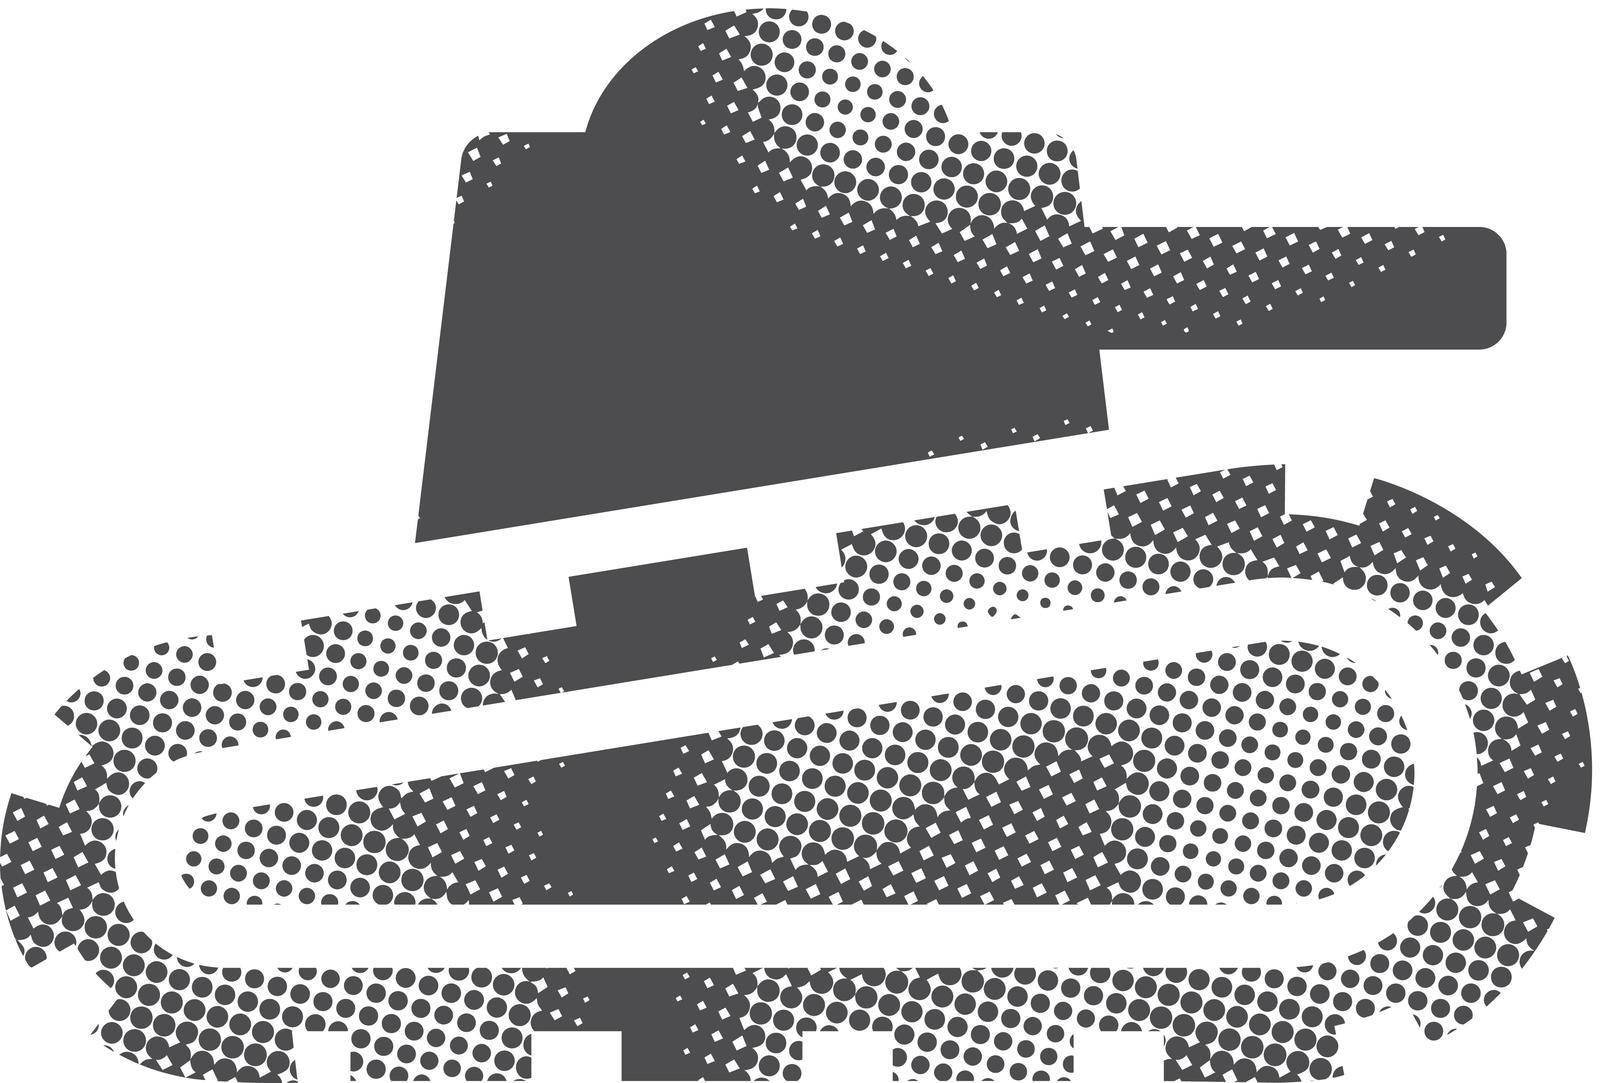 Army battle tank icon in halftone style. Black and white monochrome vector illustration.